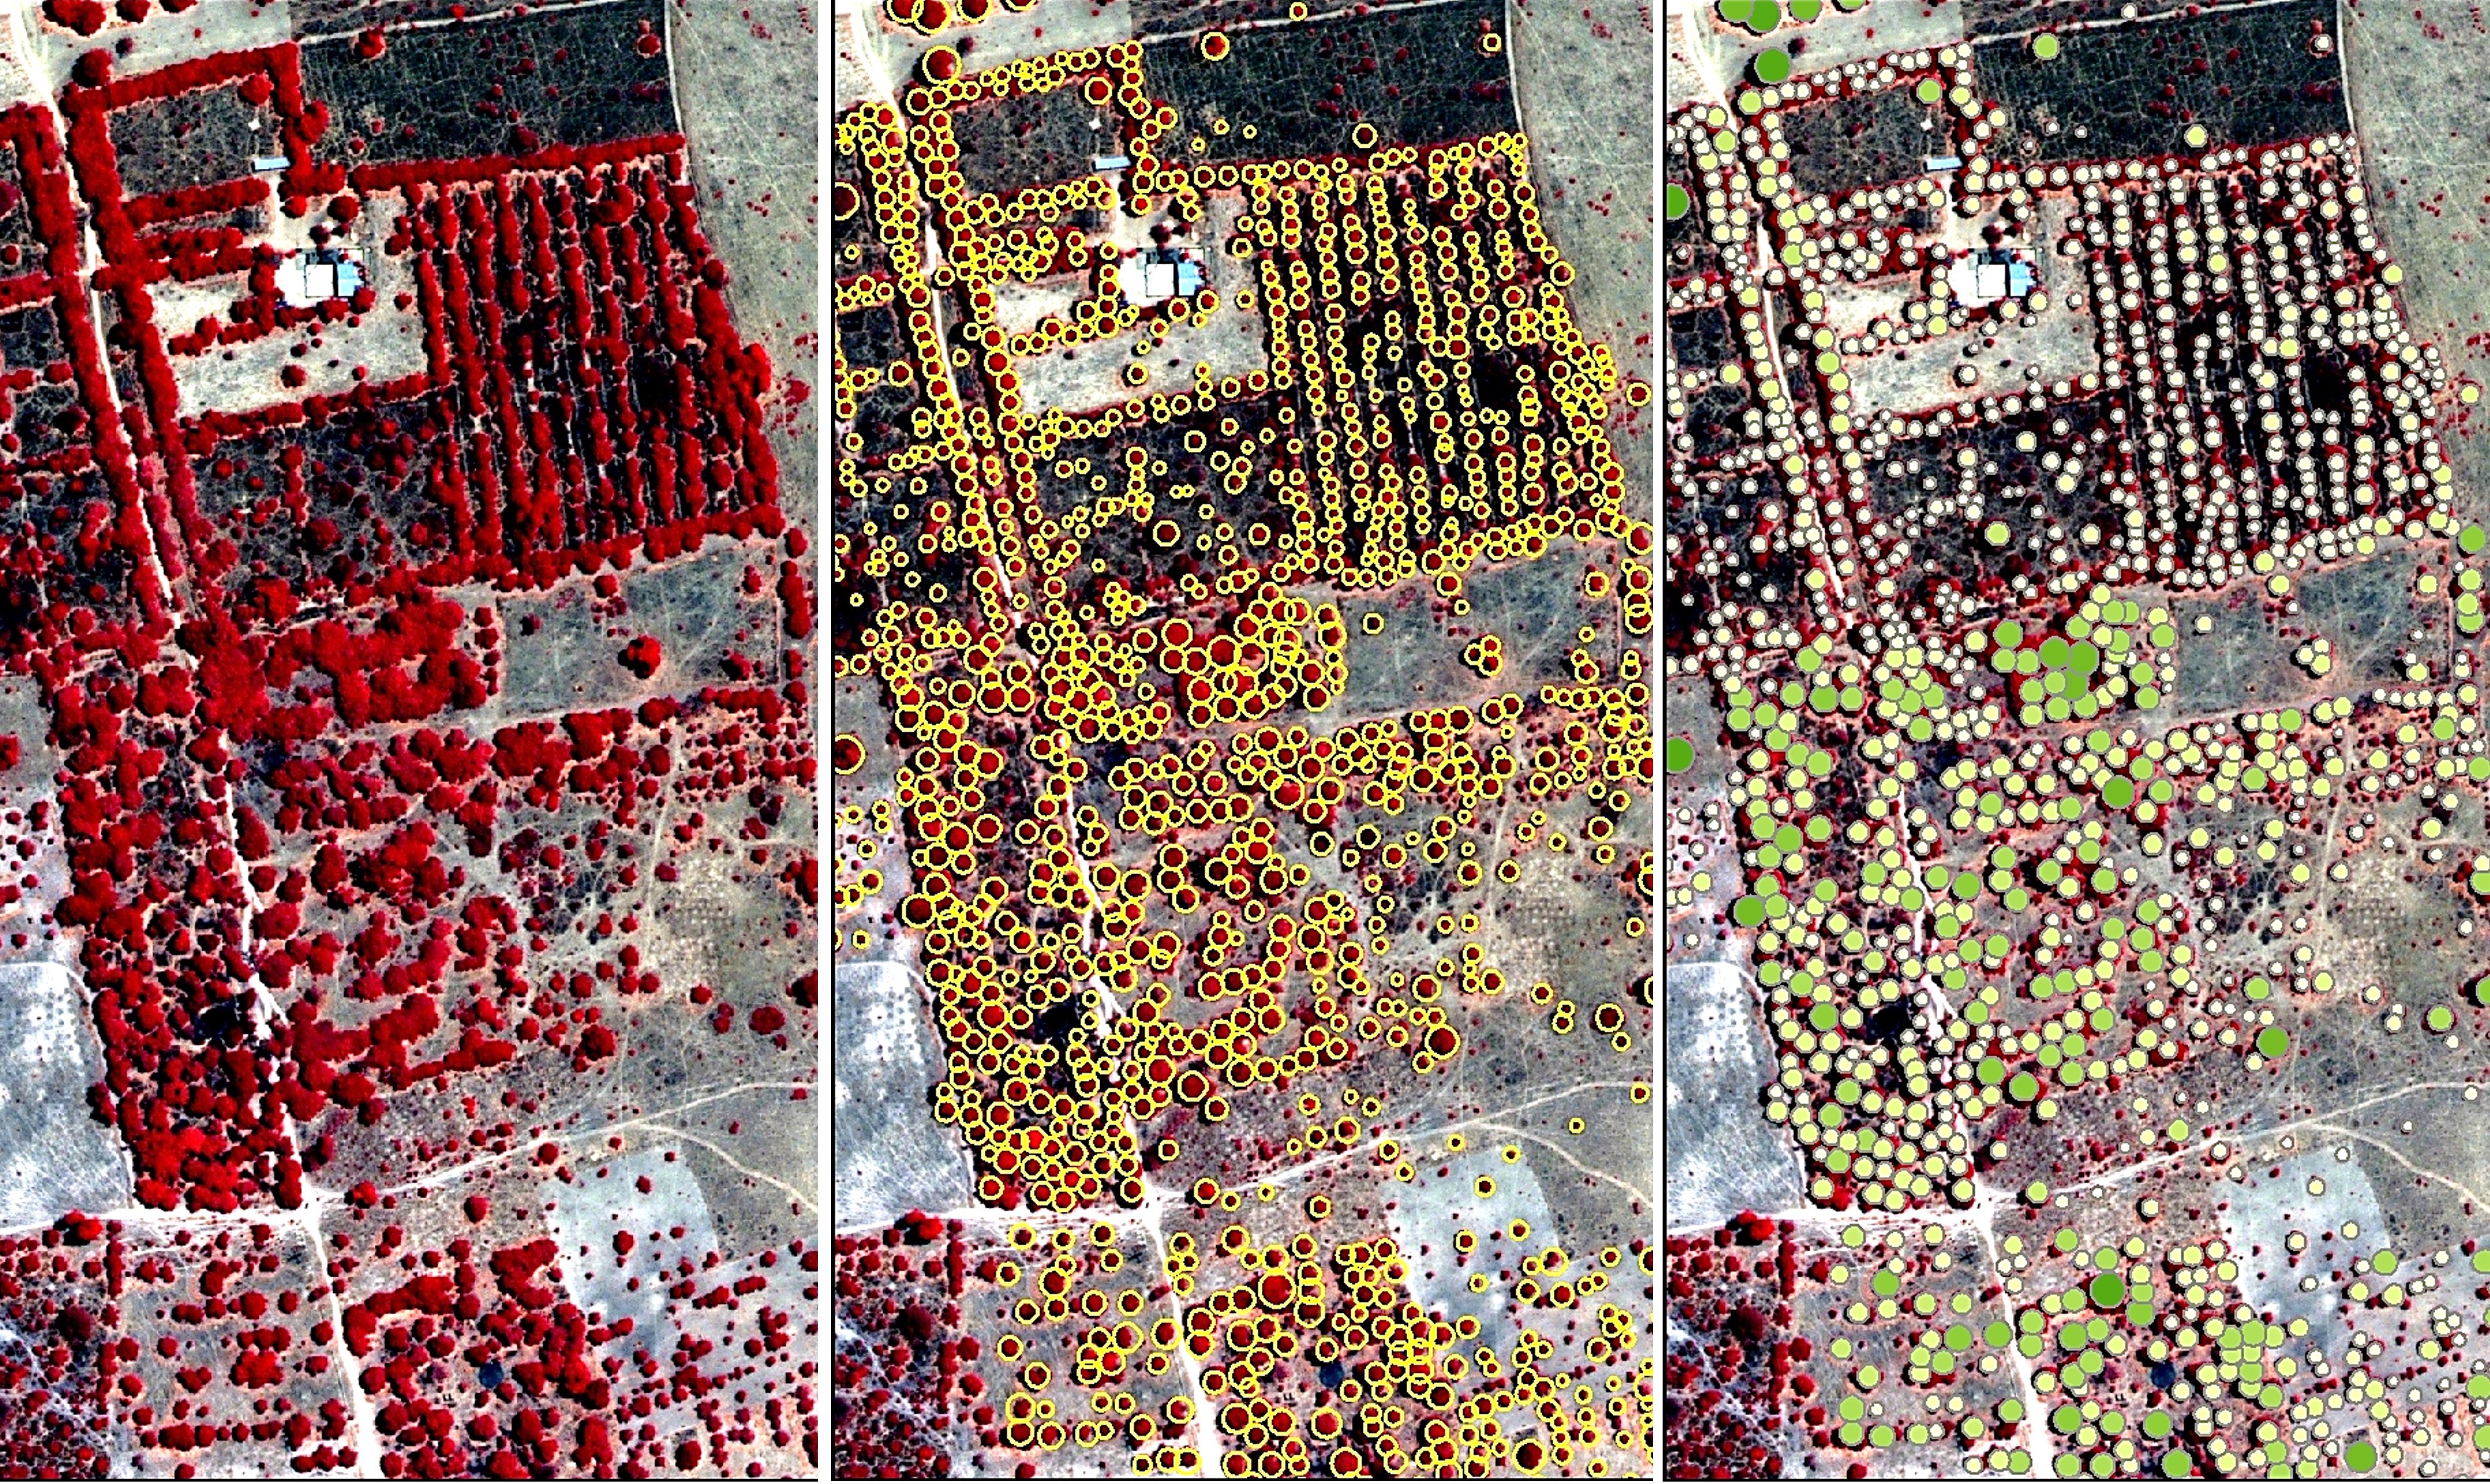 Satellite images of tree systems